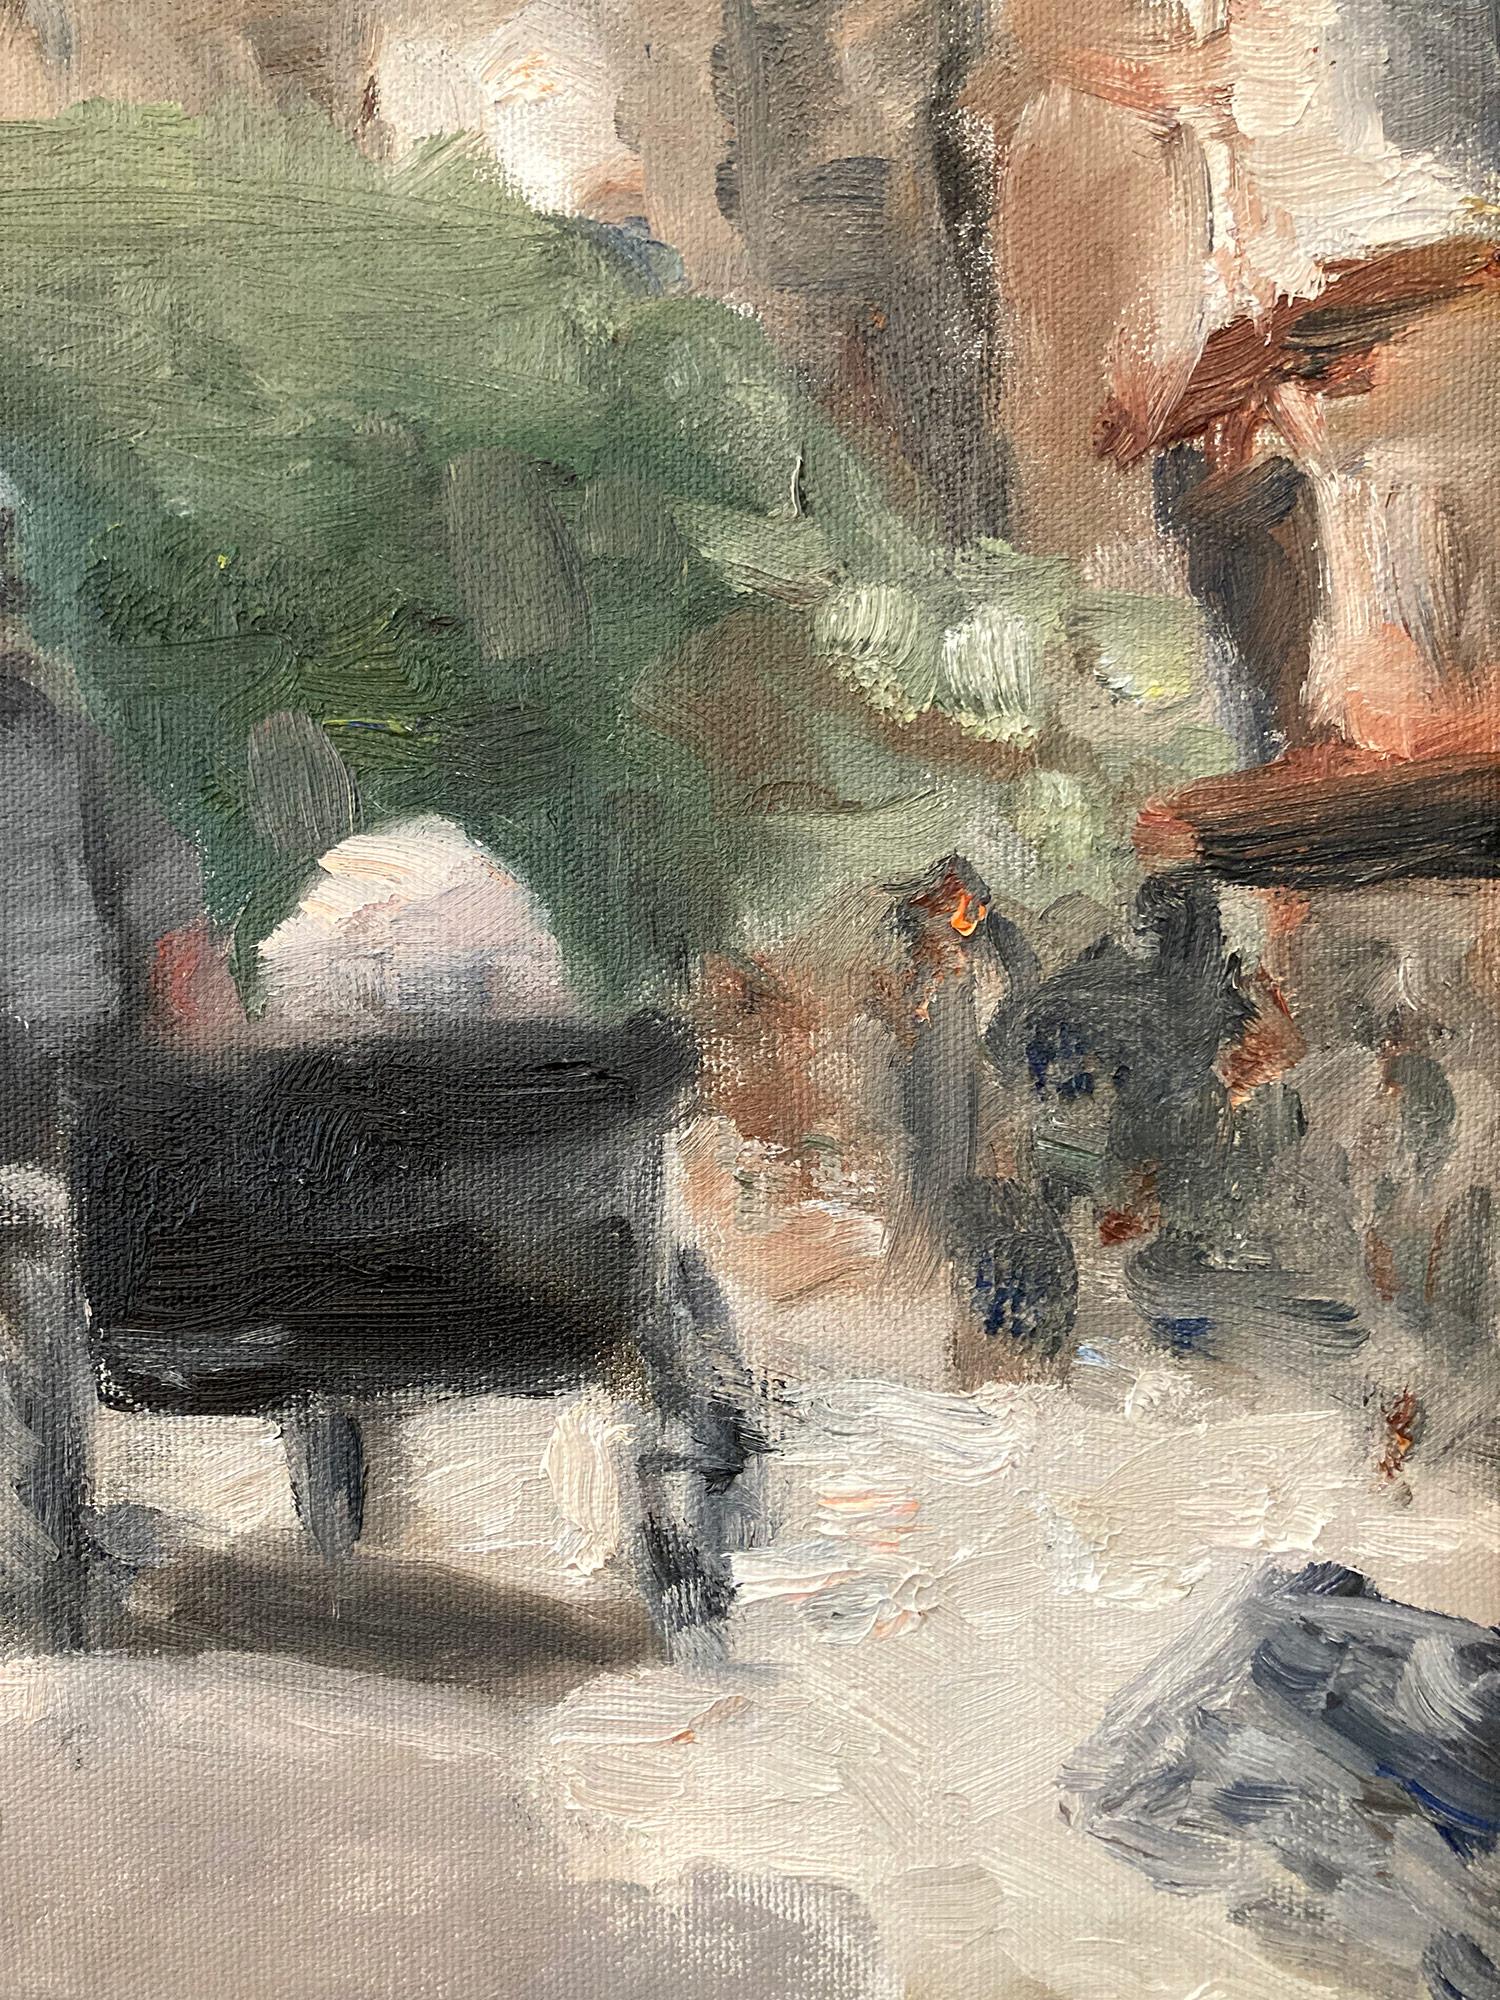 This painting depicts an impressionistic scene in a Parisian Village in France on a spring day, with beautiful brushwork and whimsical colors. The energy of the street is captured with life and vibrancy. Couples walk about with Horse and carriages,